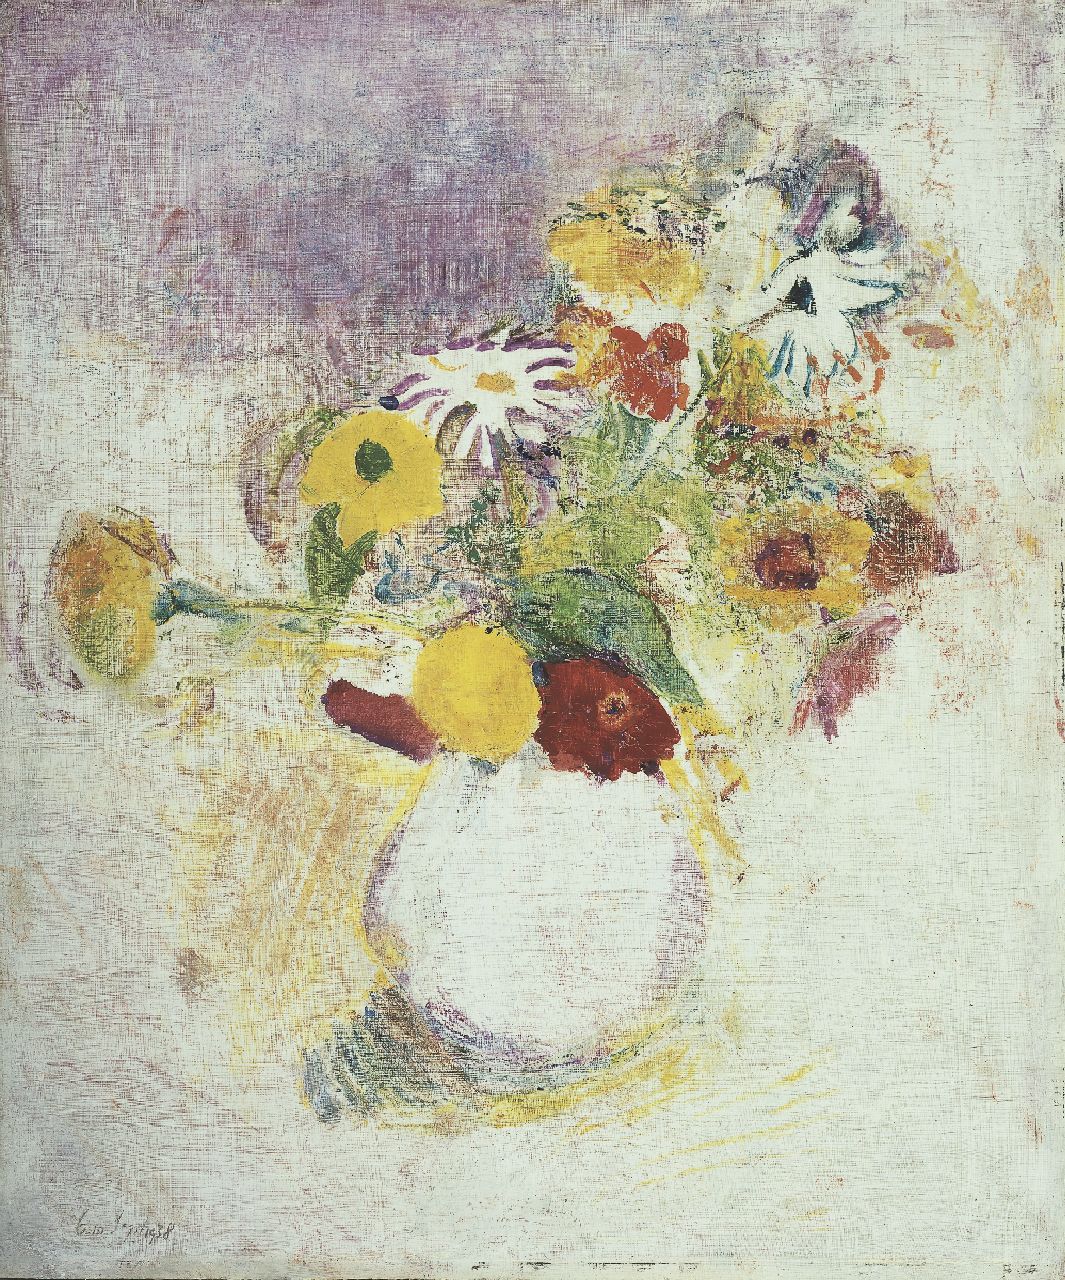 Hansen J.G.  | Jacob Gerard 'Job' Hansen, Flowers, with petrol diluted oil paint on plywood 60.4 x 50.3 cm, dated 6-10 Sept. 1938